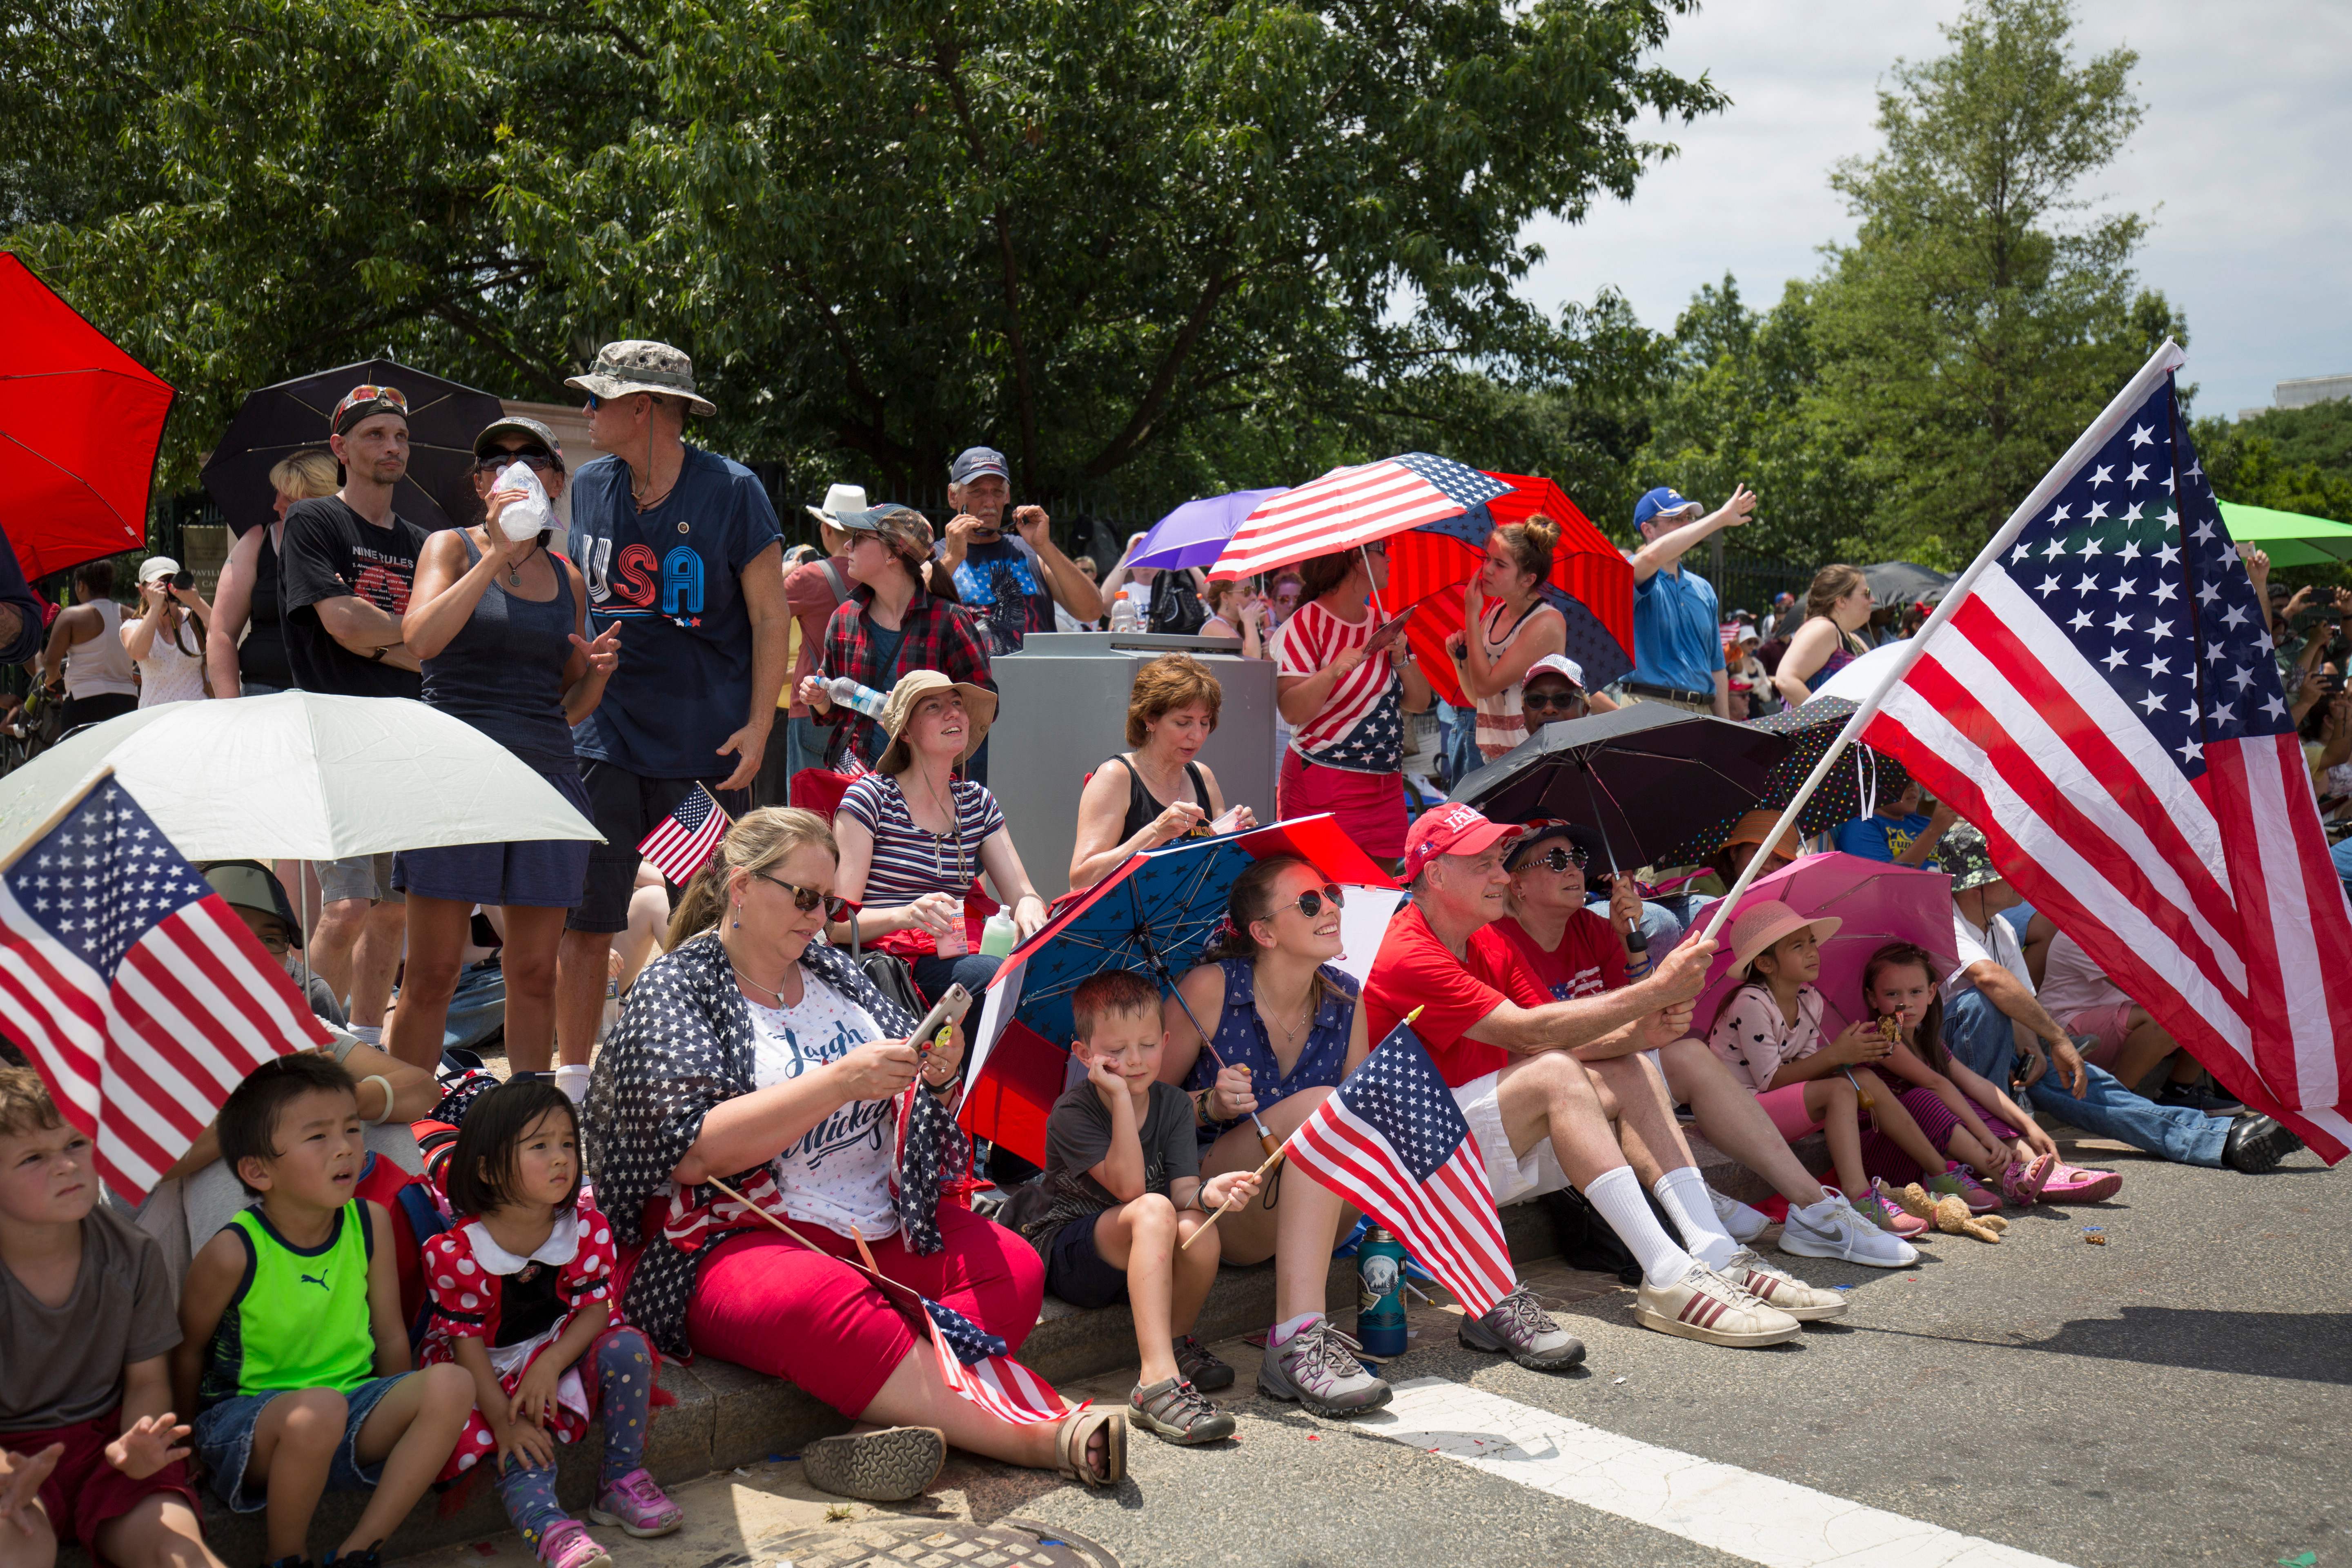 People watch the Independence Day parade in Washington, DC, on July 4, 2019. (ALASTAIR PIKE/AFP via Getty Images)